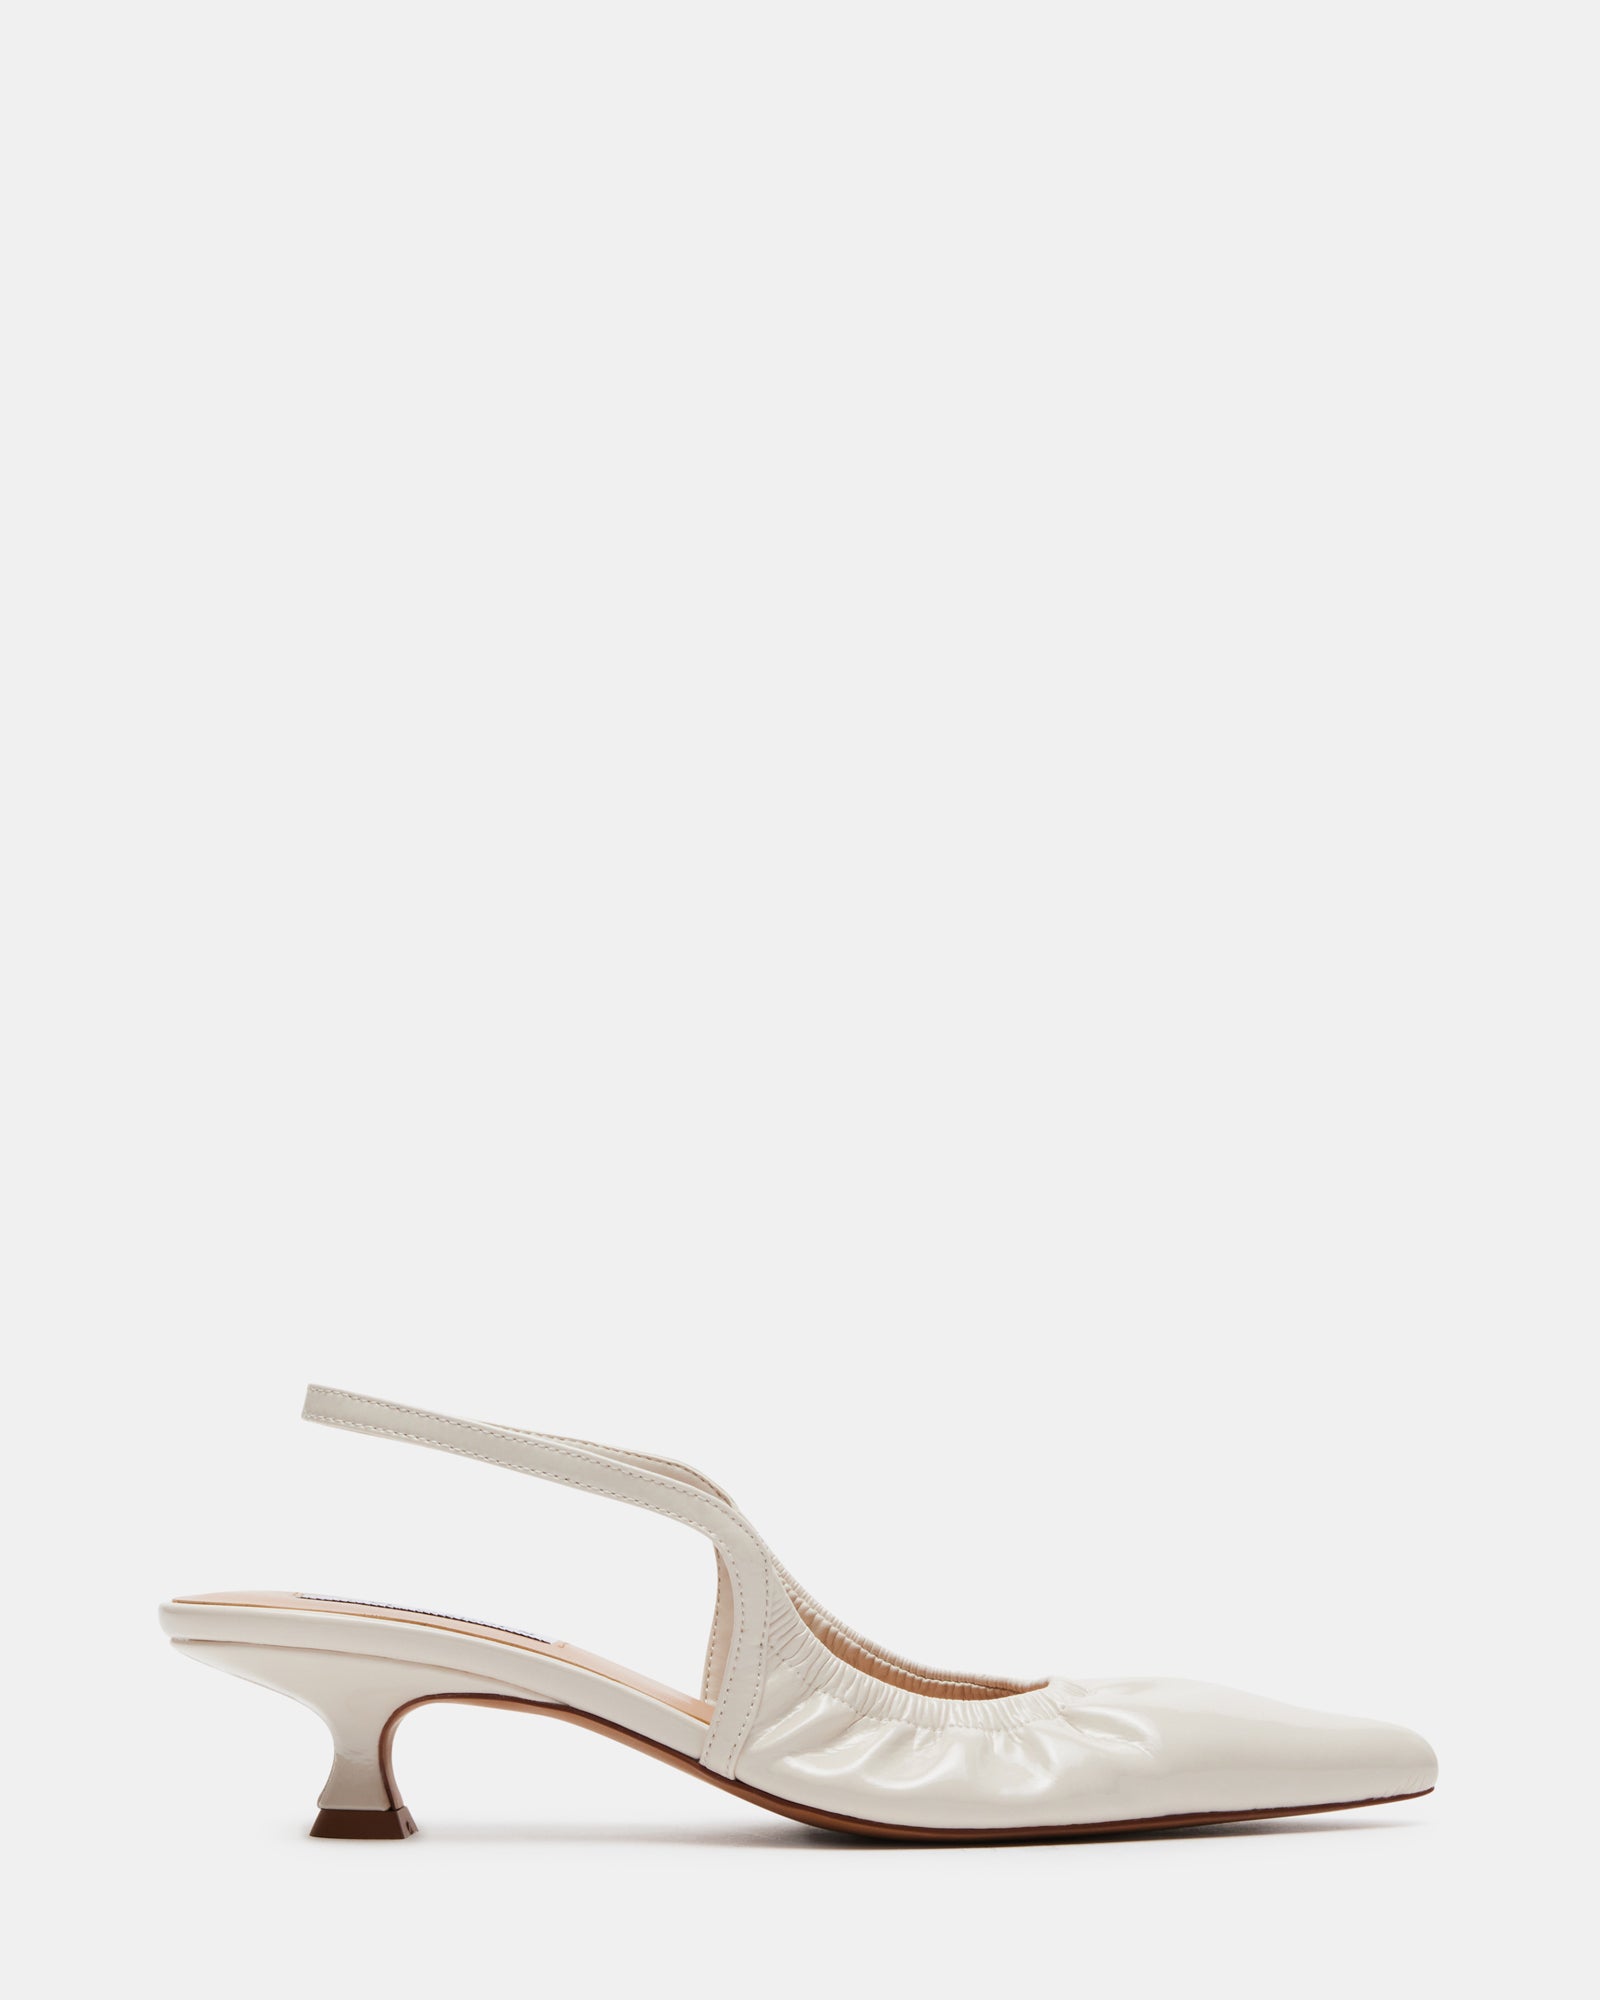 BUTTERFLY FEET WHITE CIENA1 HEELS | Rosella - Style inspired by elegance